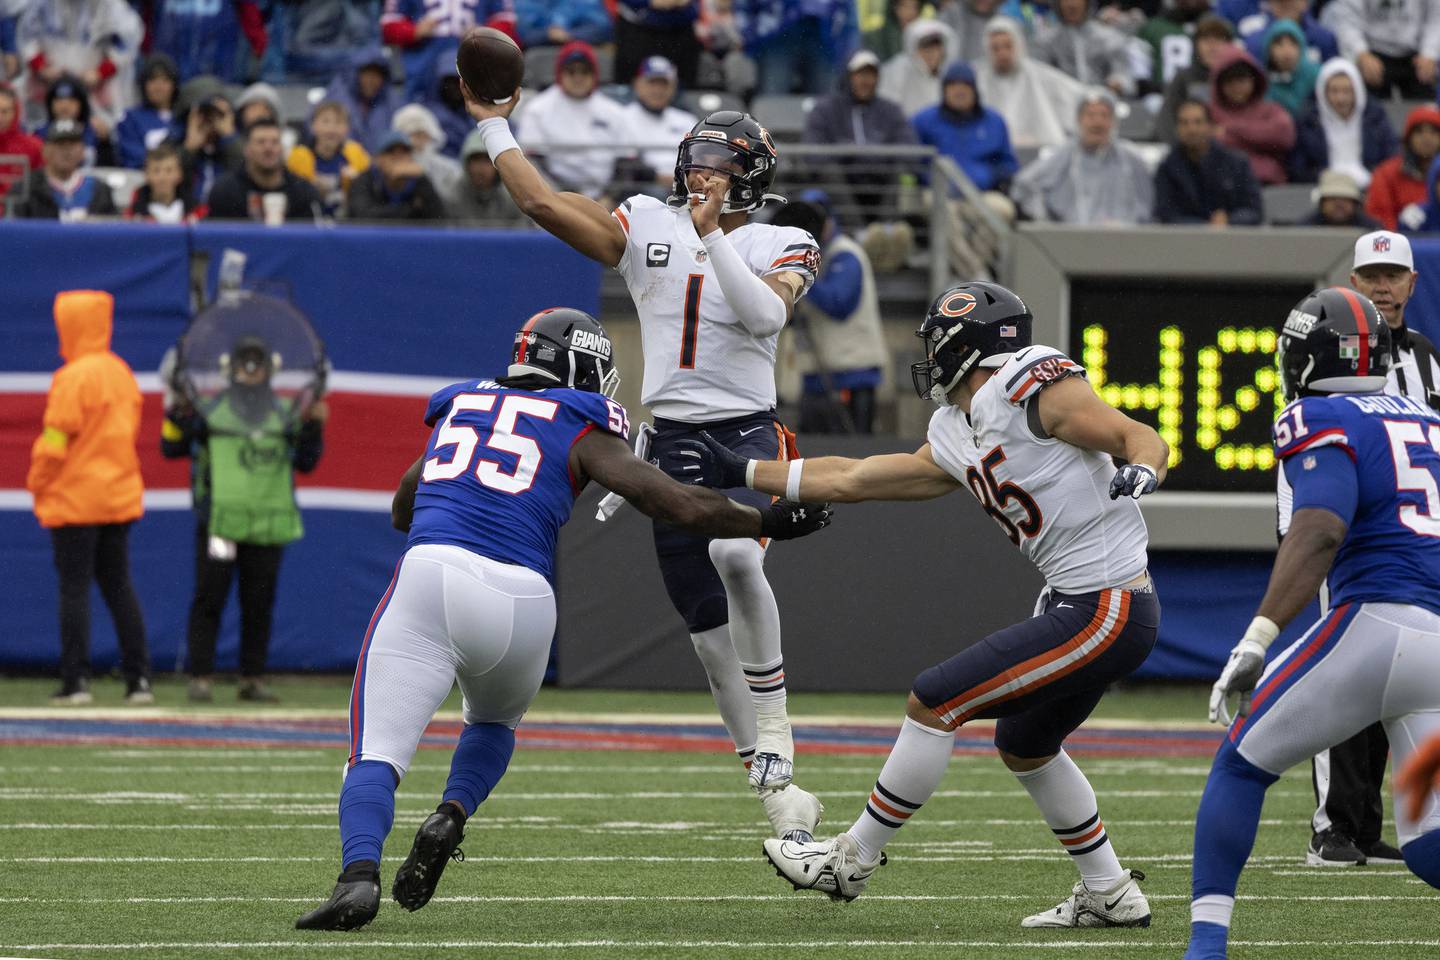 Bears quarterback Justin Fields throws an incomplete pass during the third quarter versus the Giants on Oct. 12, 2022, at MetLife Stadium in East Rutherford, N.J.